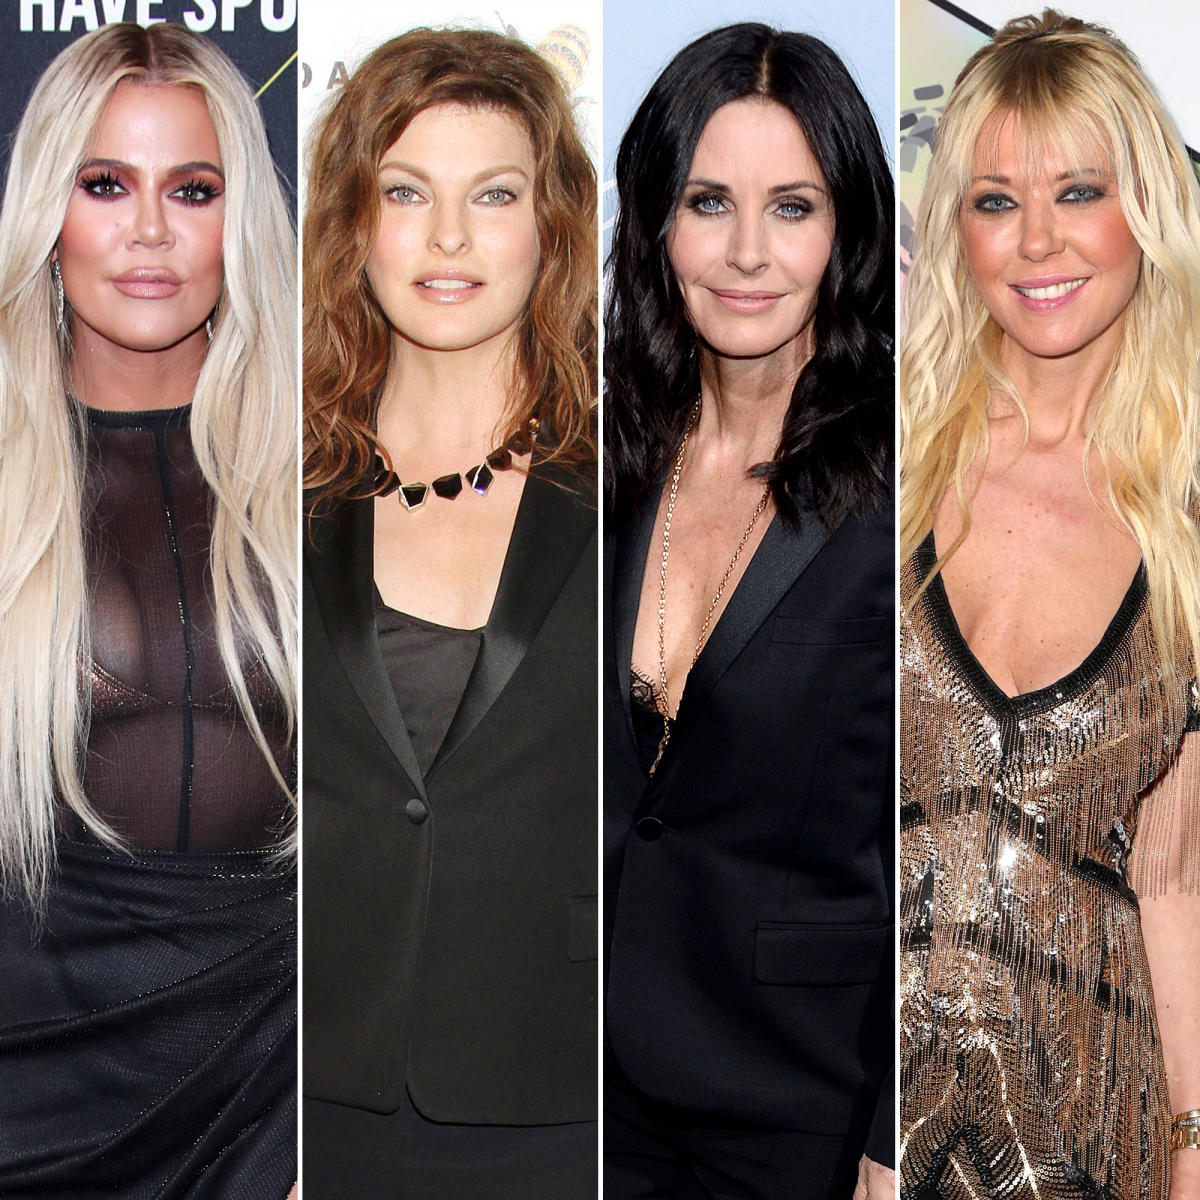 12 celebrities who've talked about plastic surgery and cosmetic